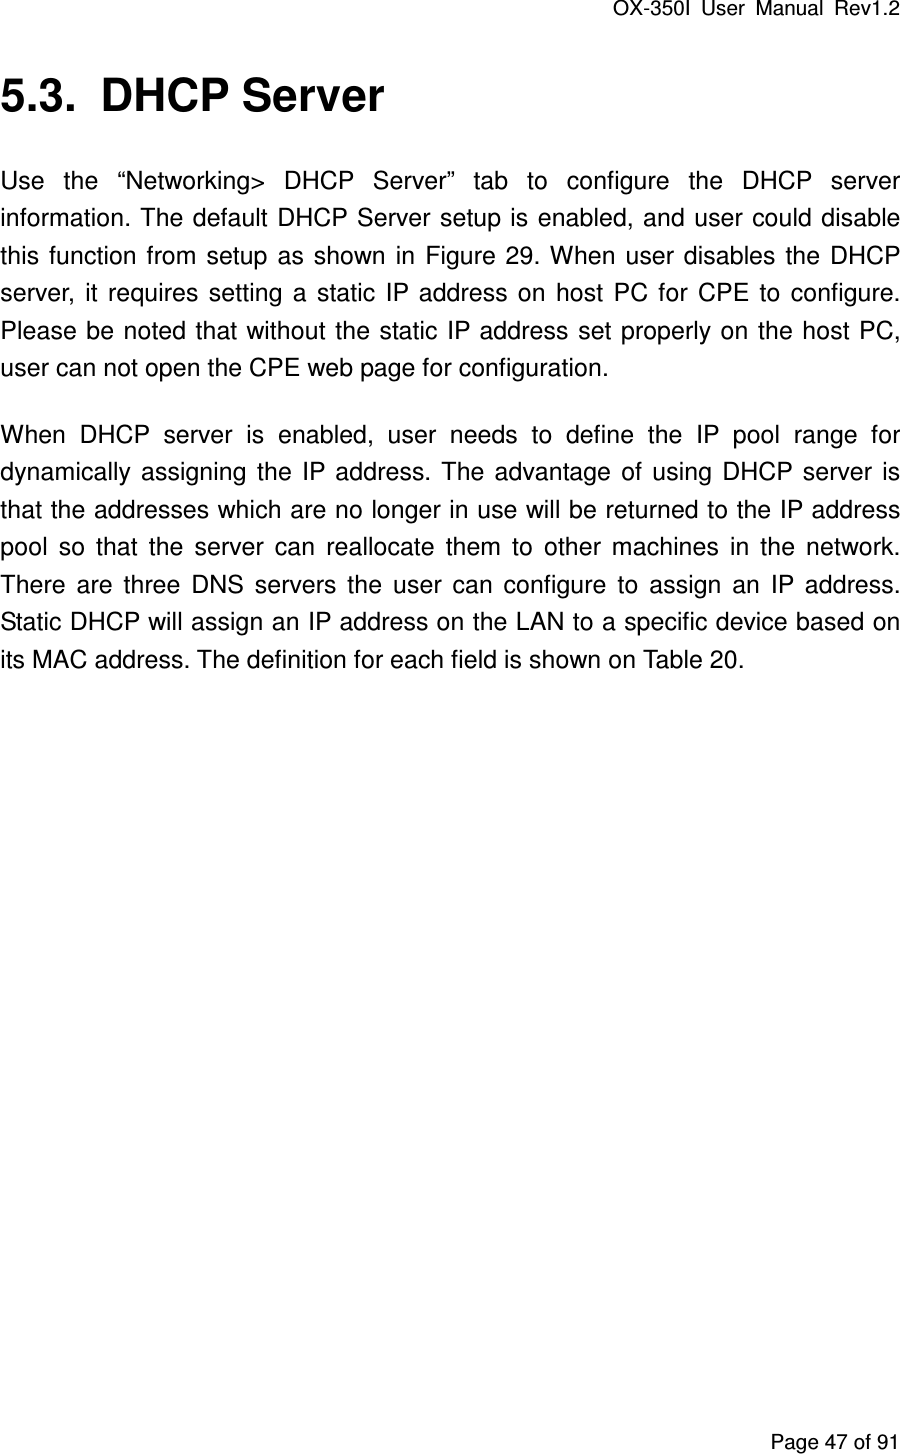 OX-350I  User  Manual  Rev1.2 Page 47 of 91 5.3.  DHCP Server Use  the  “Networking&gt;  DHCP  Server”  tab  to  configure  the  DHCP  server information. The default DHCP Server setup is enabled, and user could disable this function  from setup as shown in  Figure 29. When  user  disables  the  DHCP server,  it  requires  setting  a  static  IP address  on  host  PC  for  CPE  to  configure. Please be noted that without the static IP address set properly on the host PC, user can not open the CPE web page for configuration. When  DHCP  server  is  enabled,  user  needs  to  define  the  IP  pool  range  for dynamically  assigning  the  IP  address. The  advantage  of  using  DHCP  server  is that the addresses which are no longer in use will be returned to the IP address pool  so  that  the  server  can  reallocate  them  to  other  machines  in  the  network. There  are  three  DNS  servers  the  user  can  configure  to  assign  an  IP  address. Static DHCP will assign an IP address on the LAN to a specific device based on its MAC address. The definition for each field is shown on Table 20. 